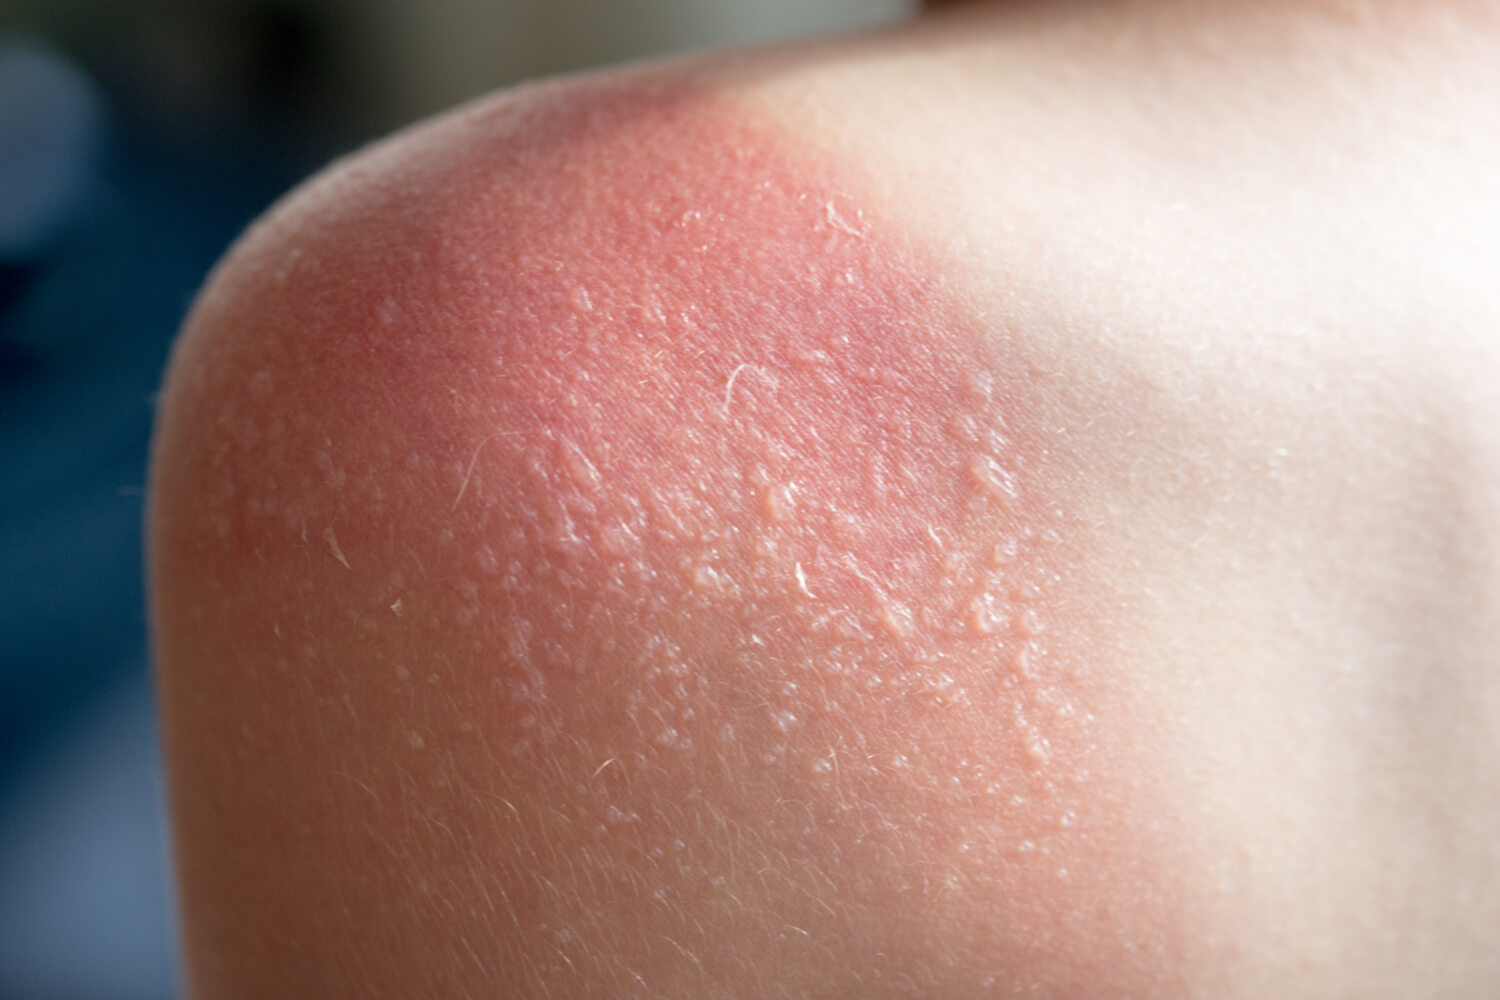 Sunburns appear as hot red patches of skin after extended sun exposure